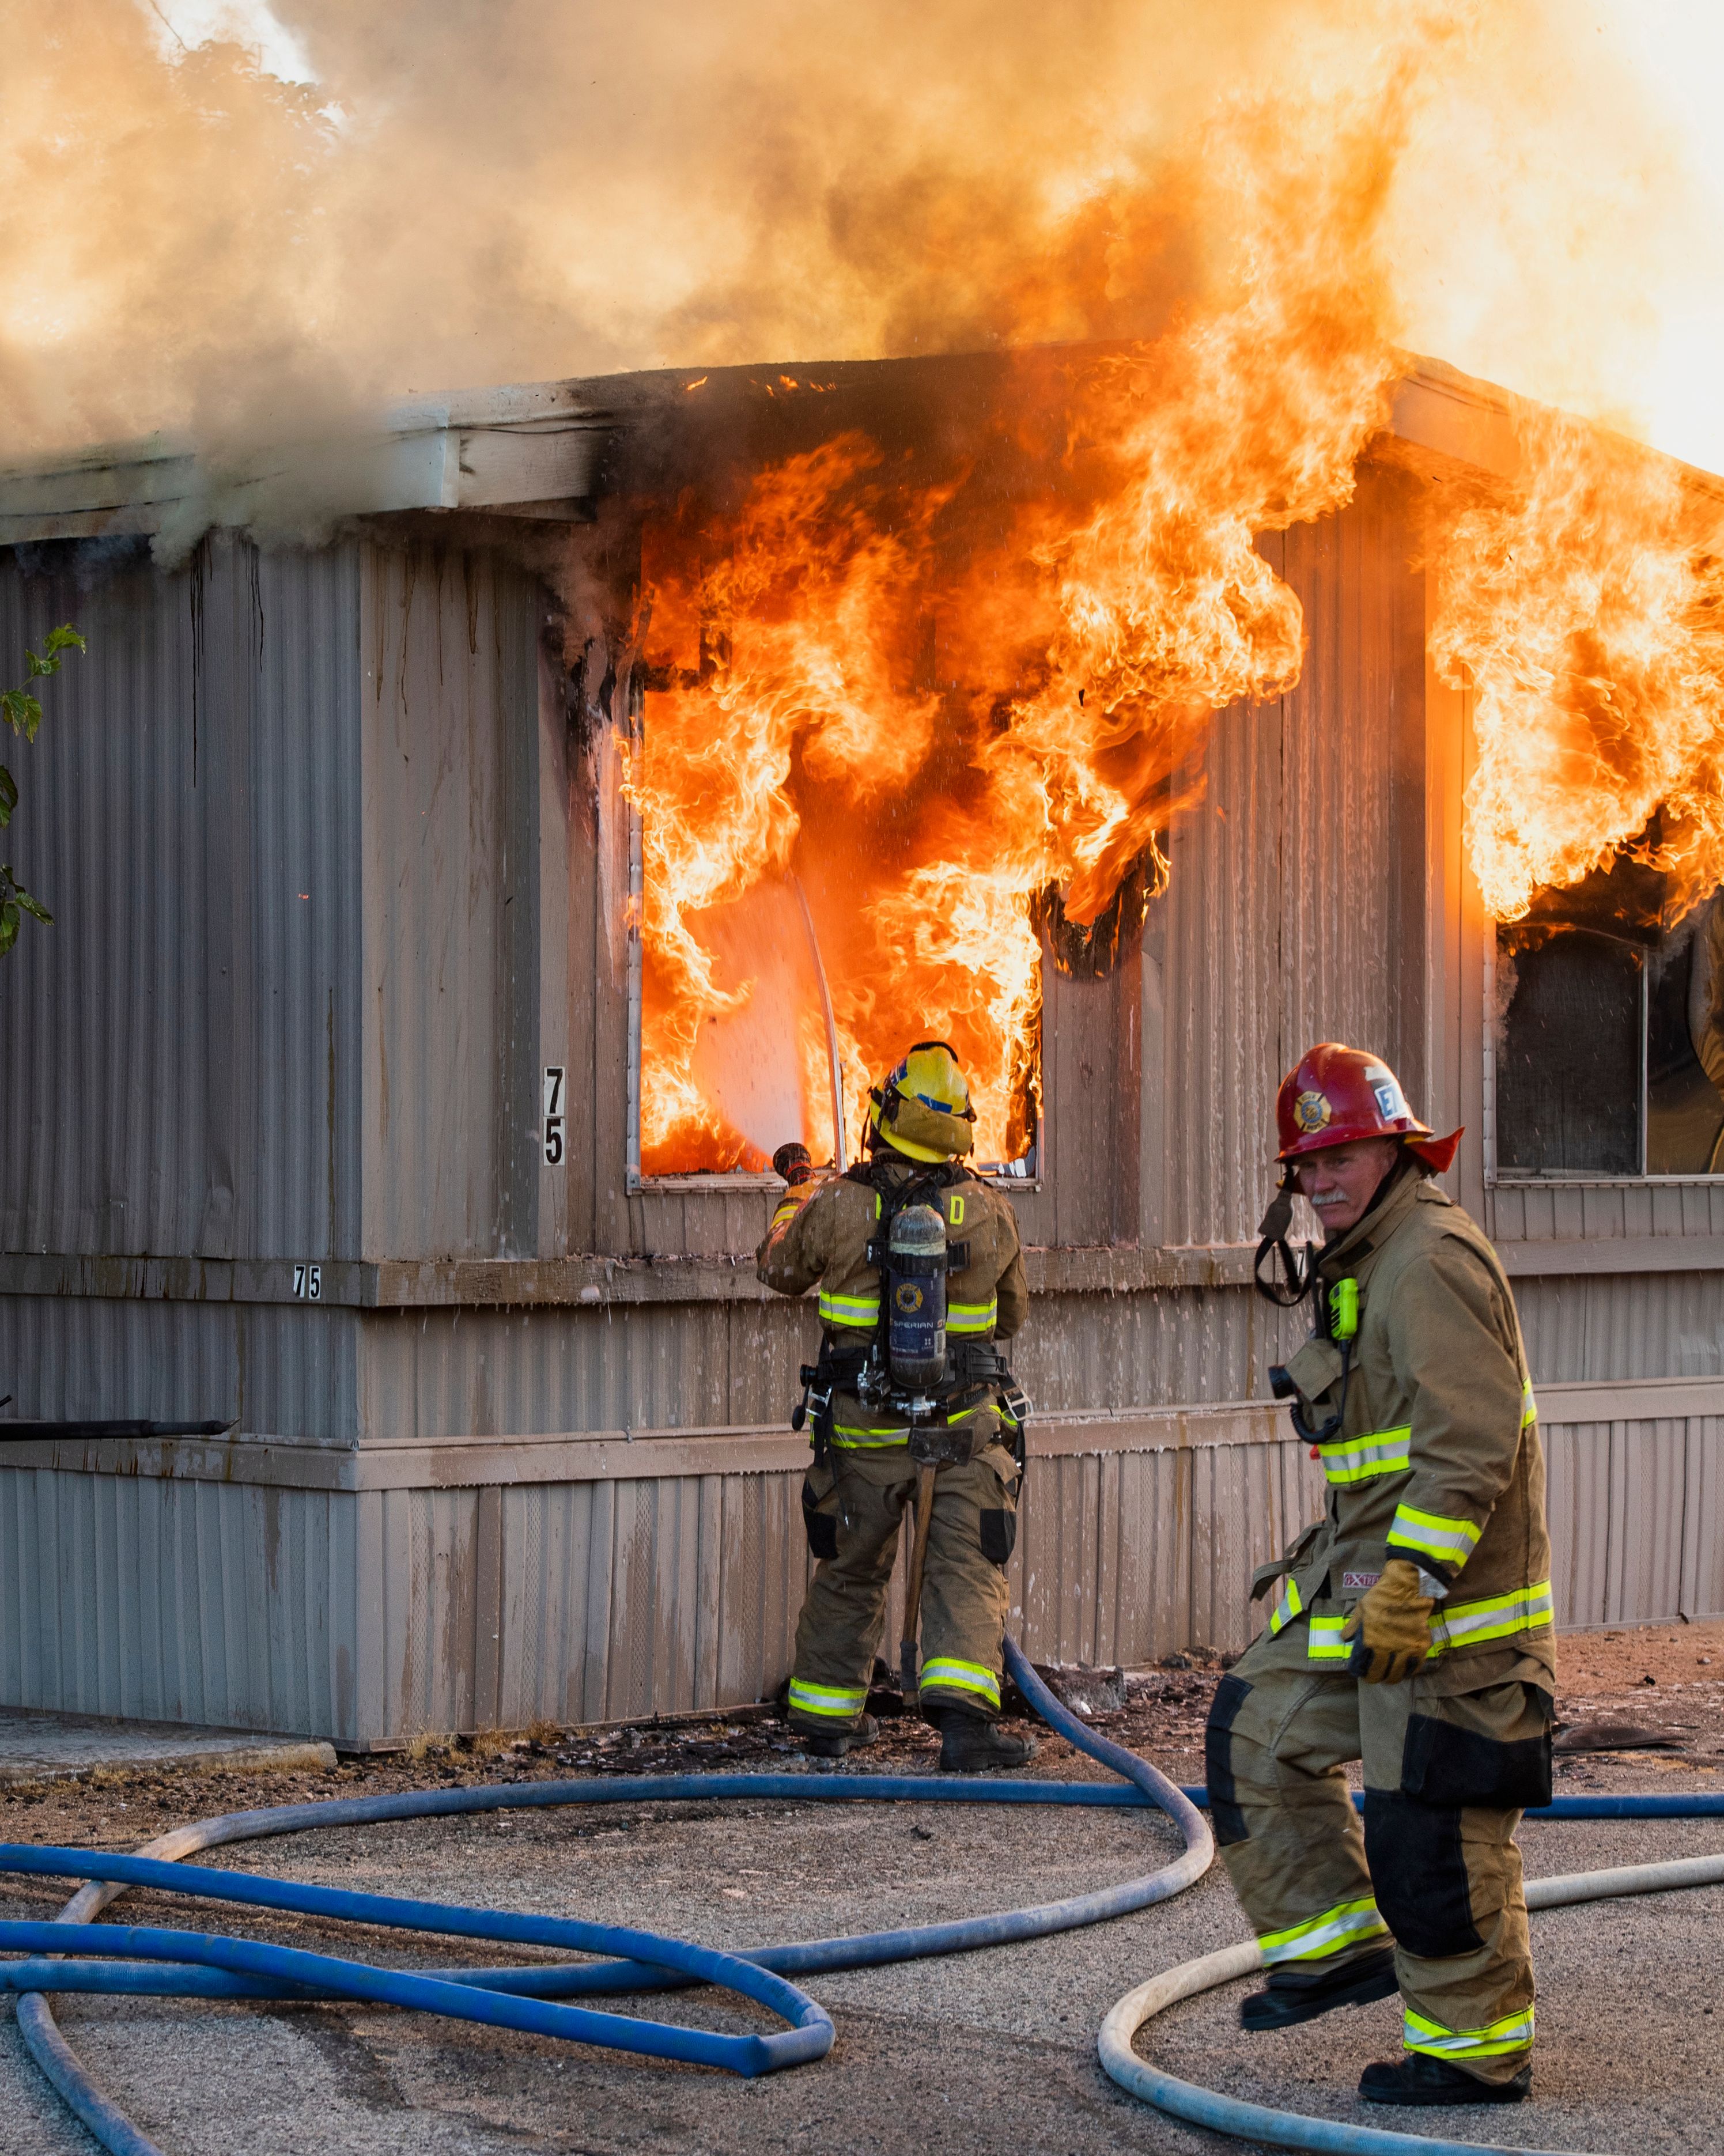 Firefighters battle an electrical fire in a mobile home park in Ridgecrest, California July 6, 2019, following a magnitude 7.1 earthquake on July 5. (ROBYN BECK/AFP/Getty Images)